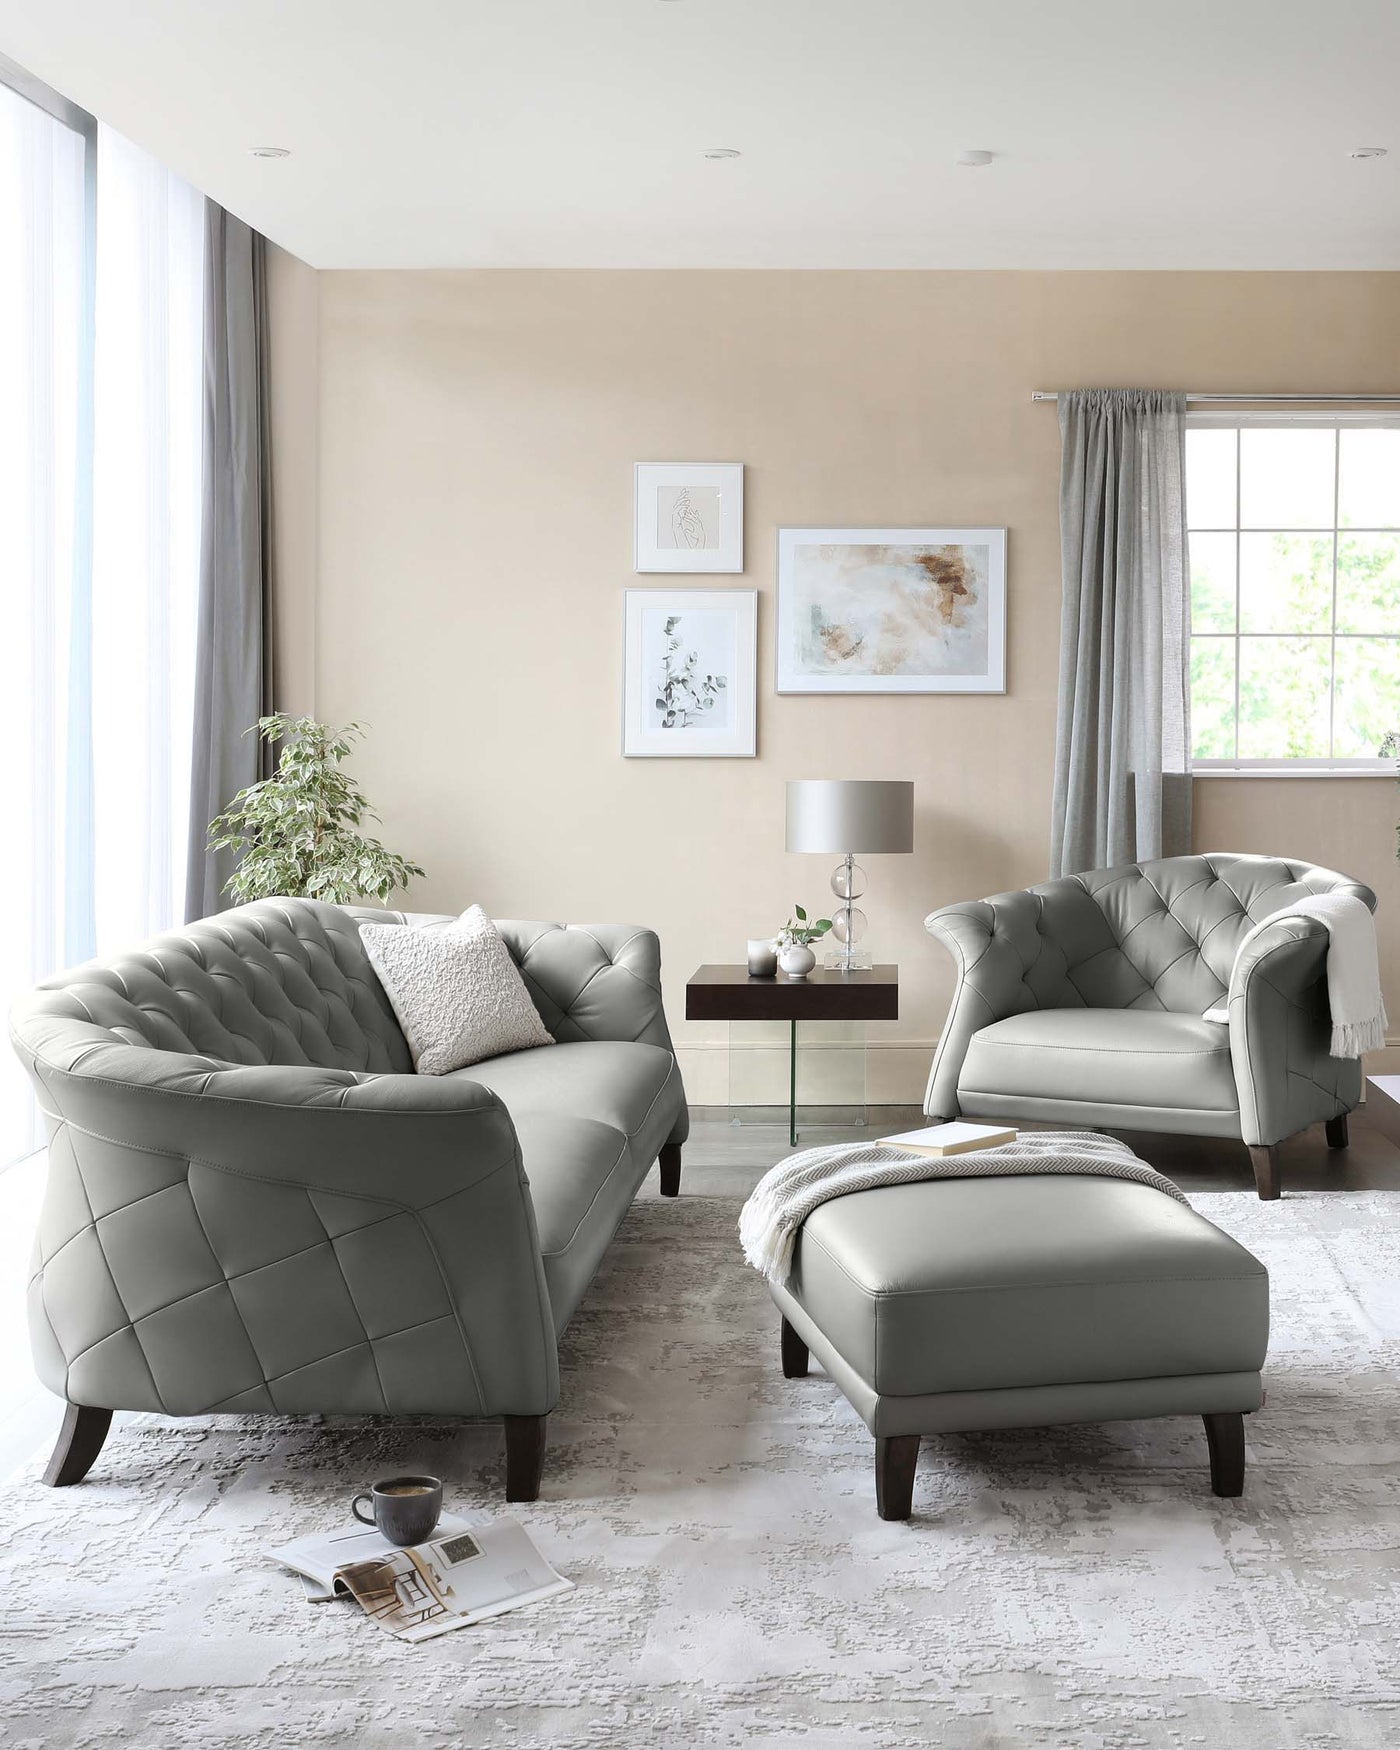 A contemporary living room set featuring a plush, tufted, light grey leather sofa and a matching armchair with quilted detailing. Between them stands a small square, dark-stained wooden coffee table with a glass vase and a pair of modern table lamps. To the right, a coordinating ottoman complements the set, draped with a soft white throw blanket.